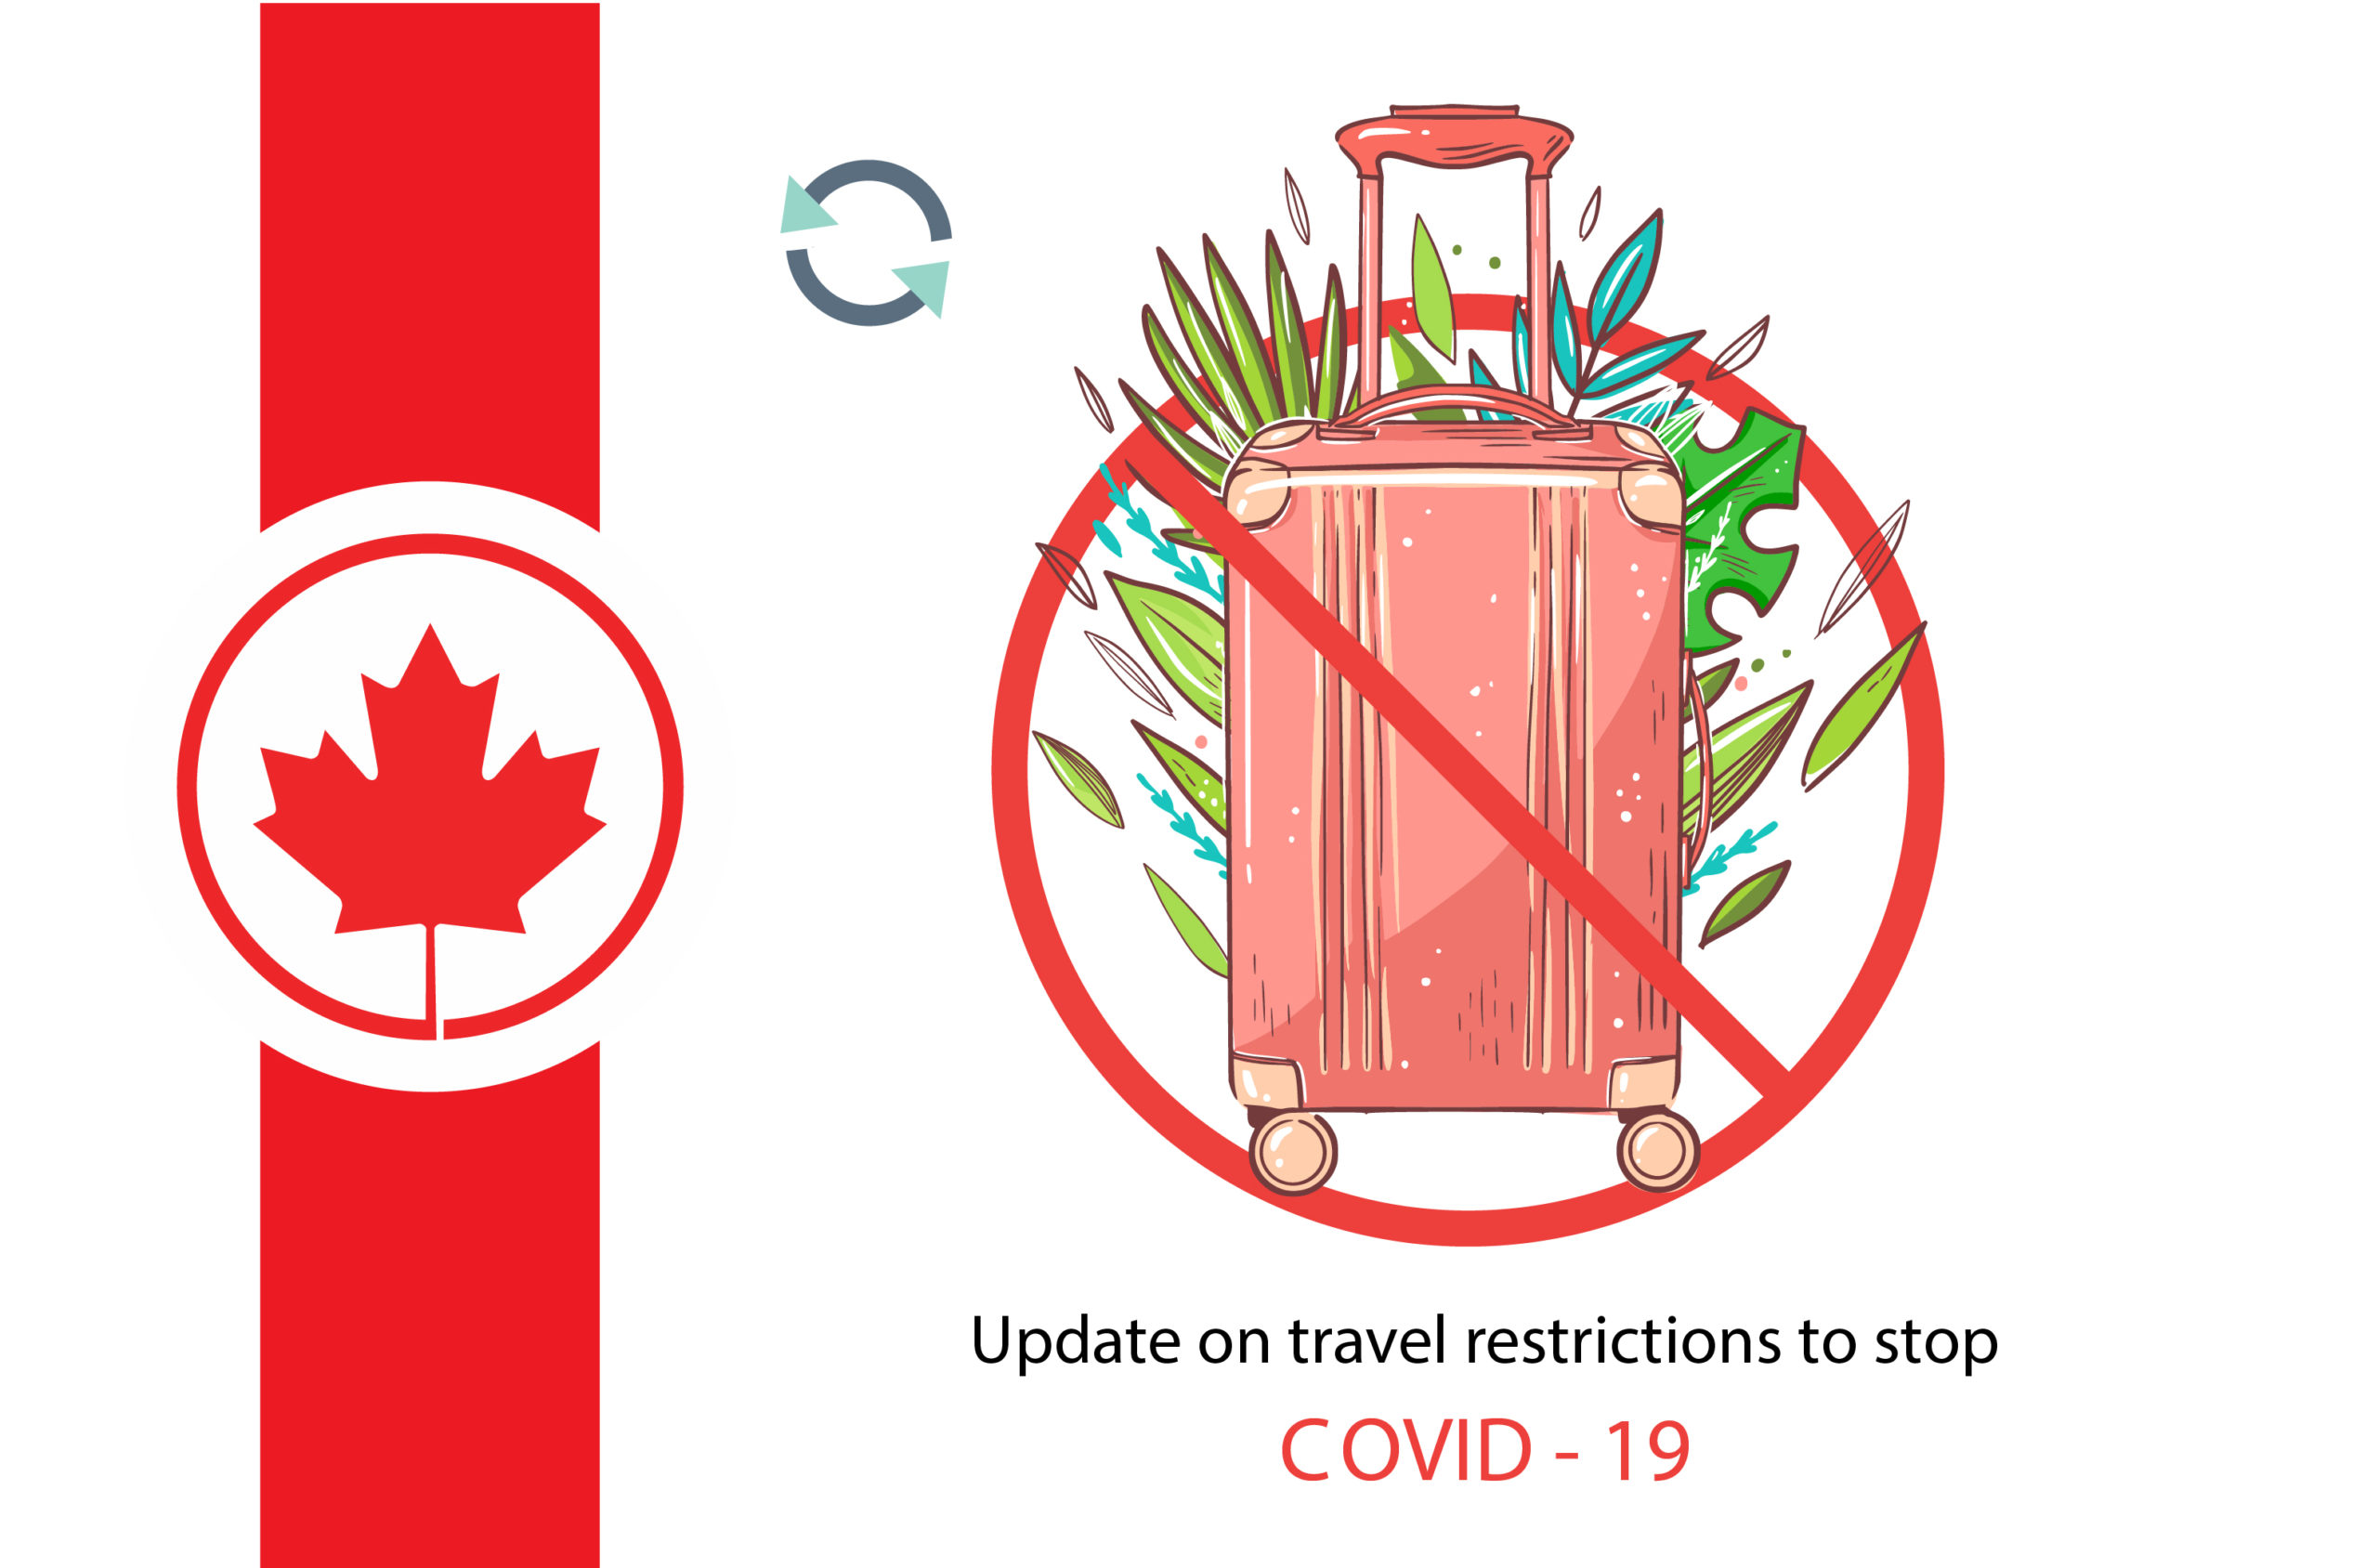 Update on travel restrictions put in place to stem the spread of COVID-19